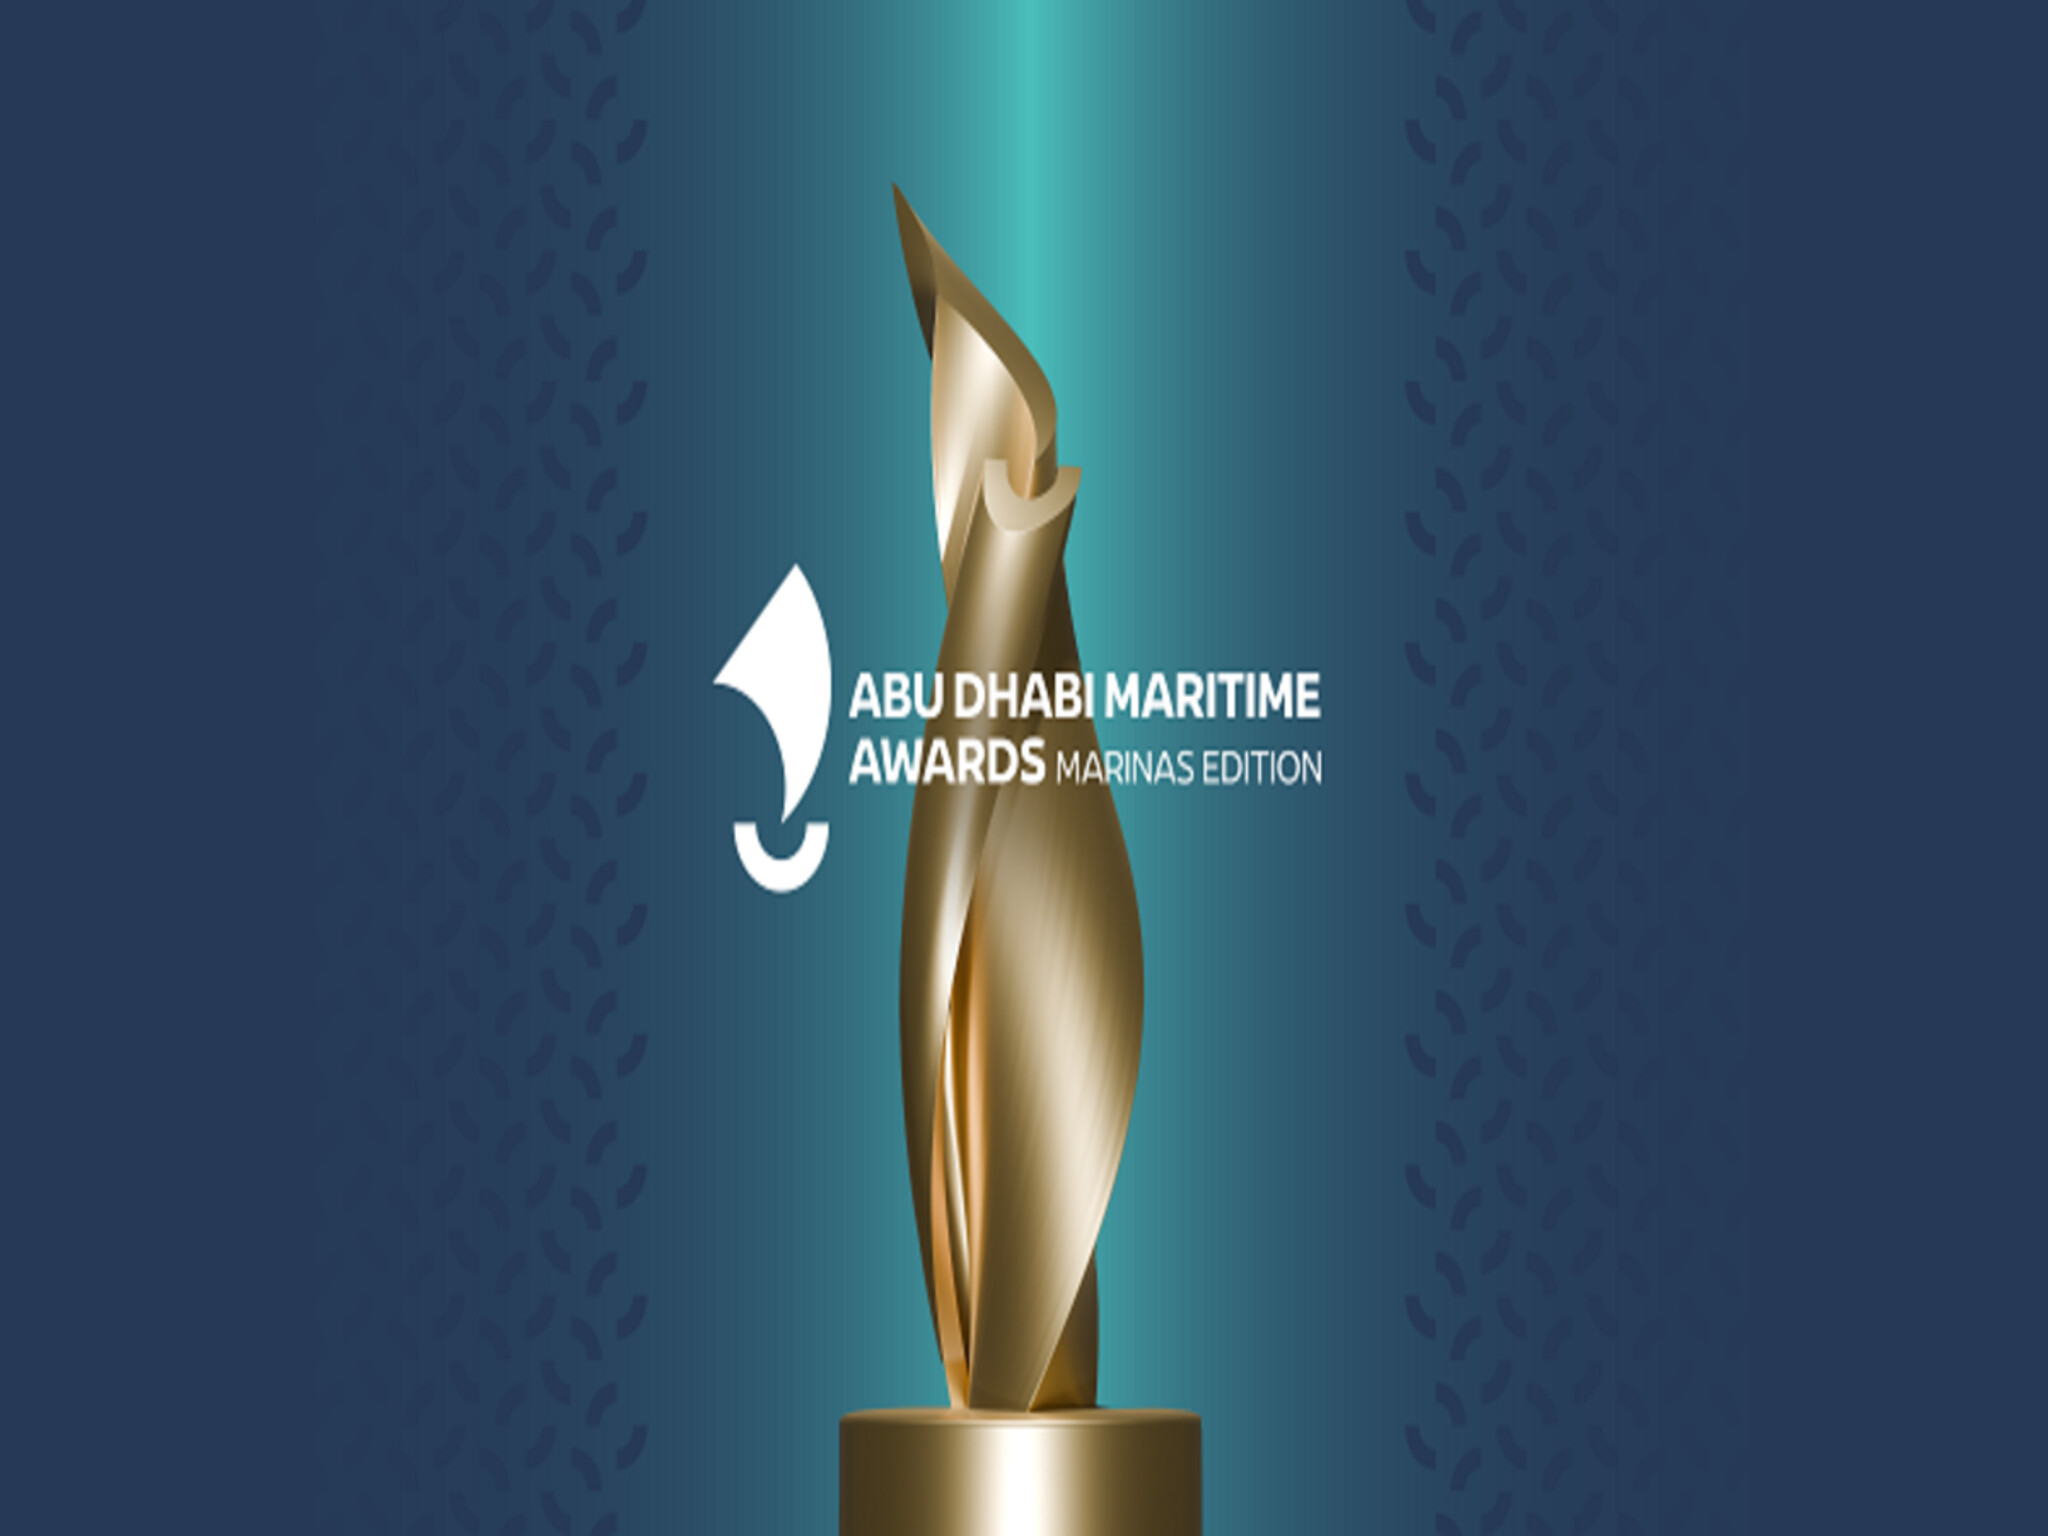 Abu Dhabi Maritime launches the second edition of the Marina Awards